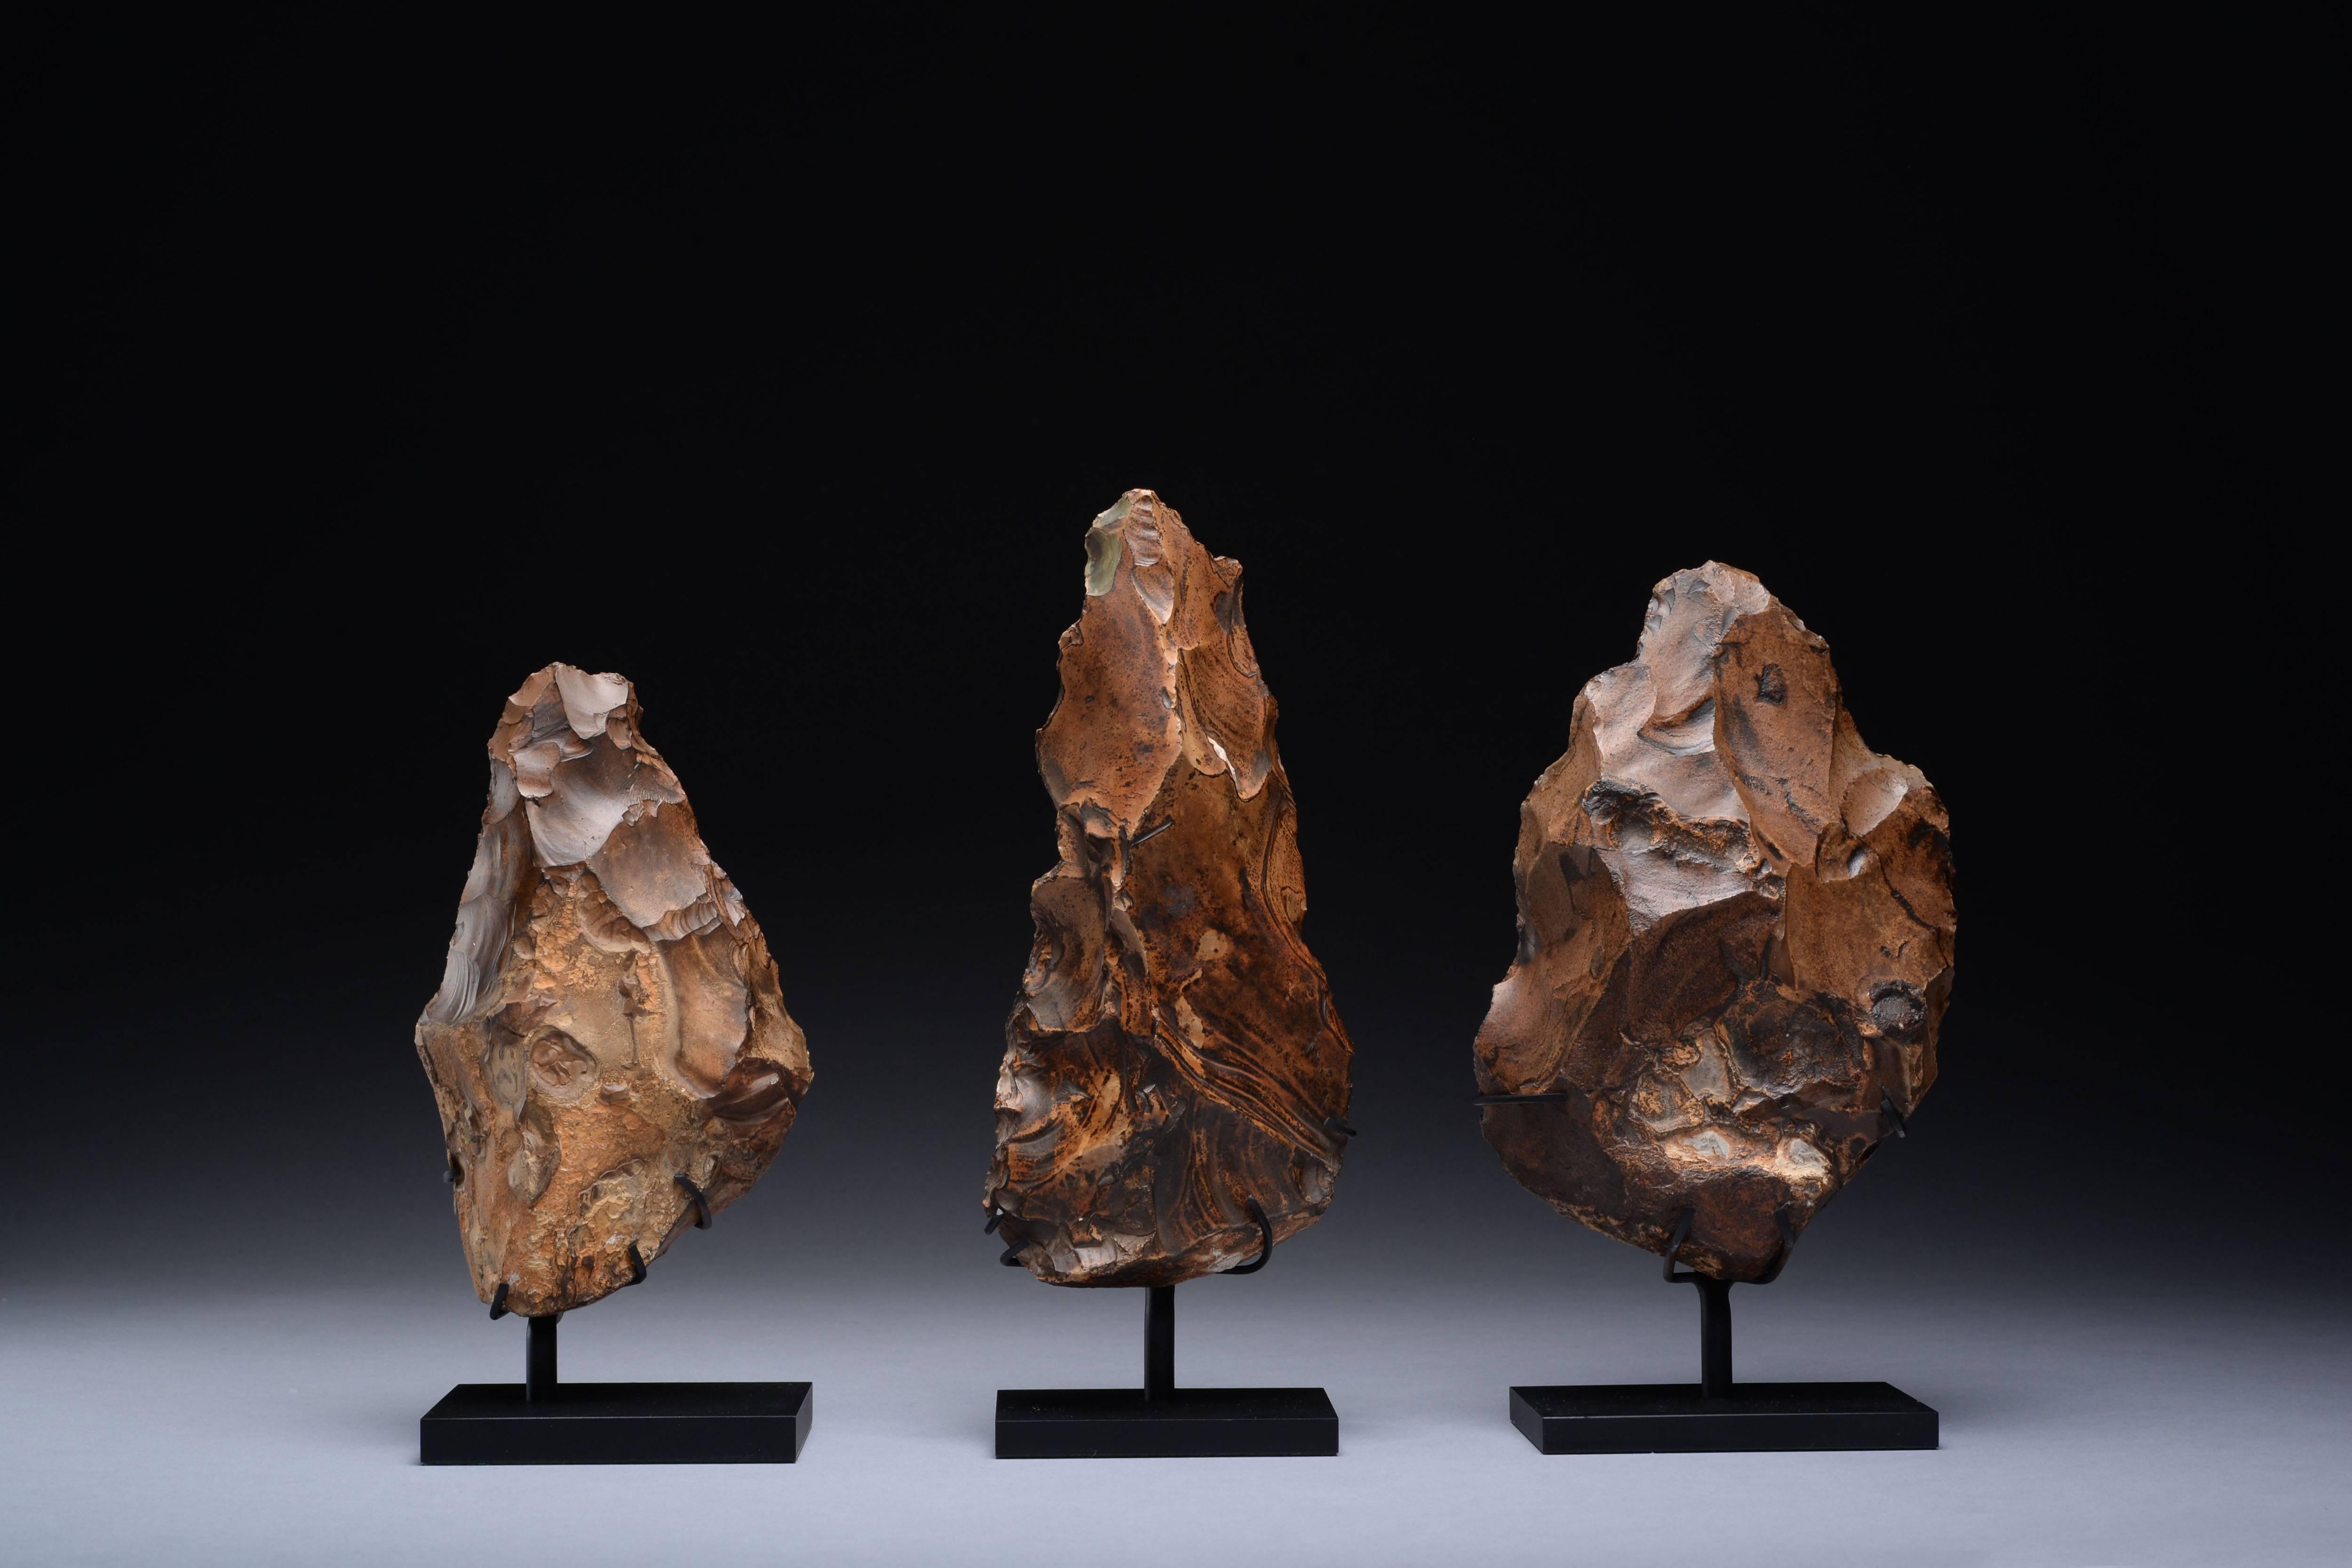 A collection of large Egyptian flint hand axes, made by Homo erectus, dating to the early-middle Paleolithic, circa 400,000-250,000 years ago.

Worked with care and precision, these artefacts go beyond the necessary and suggest an aesthetic sense